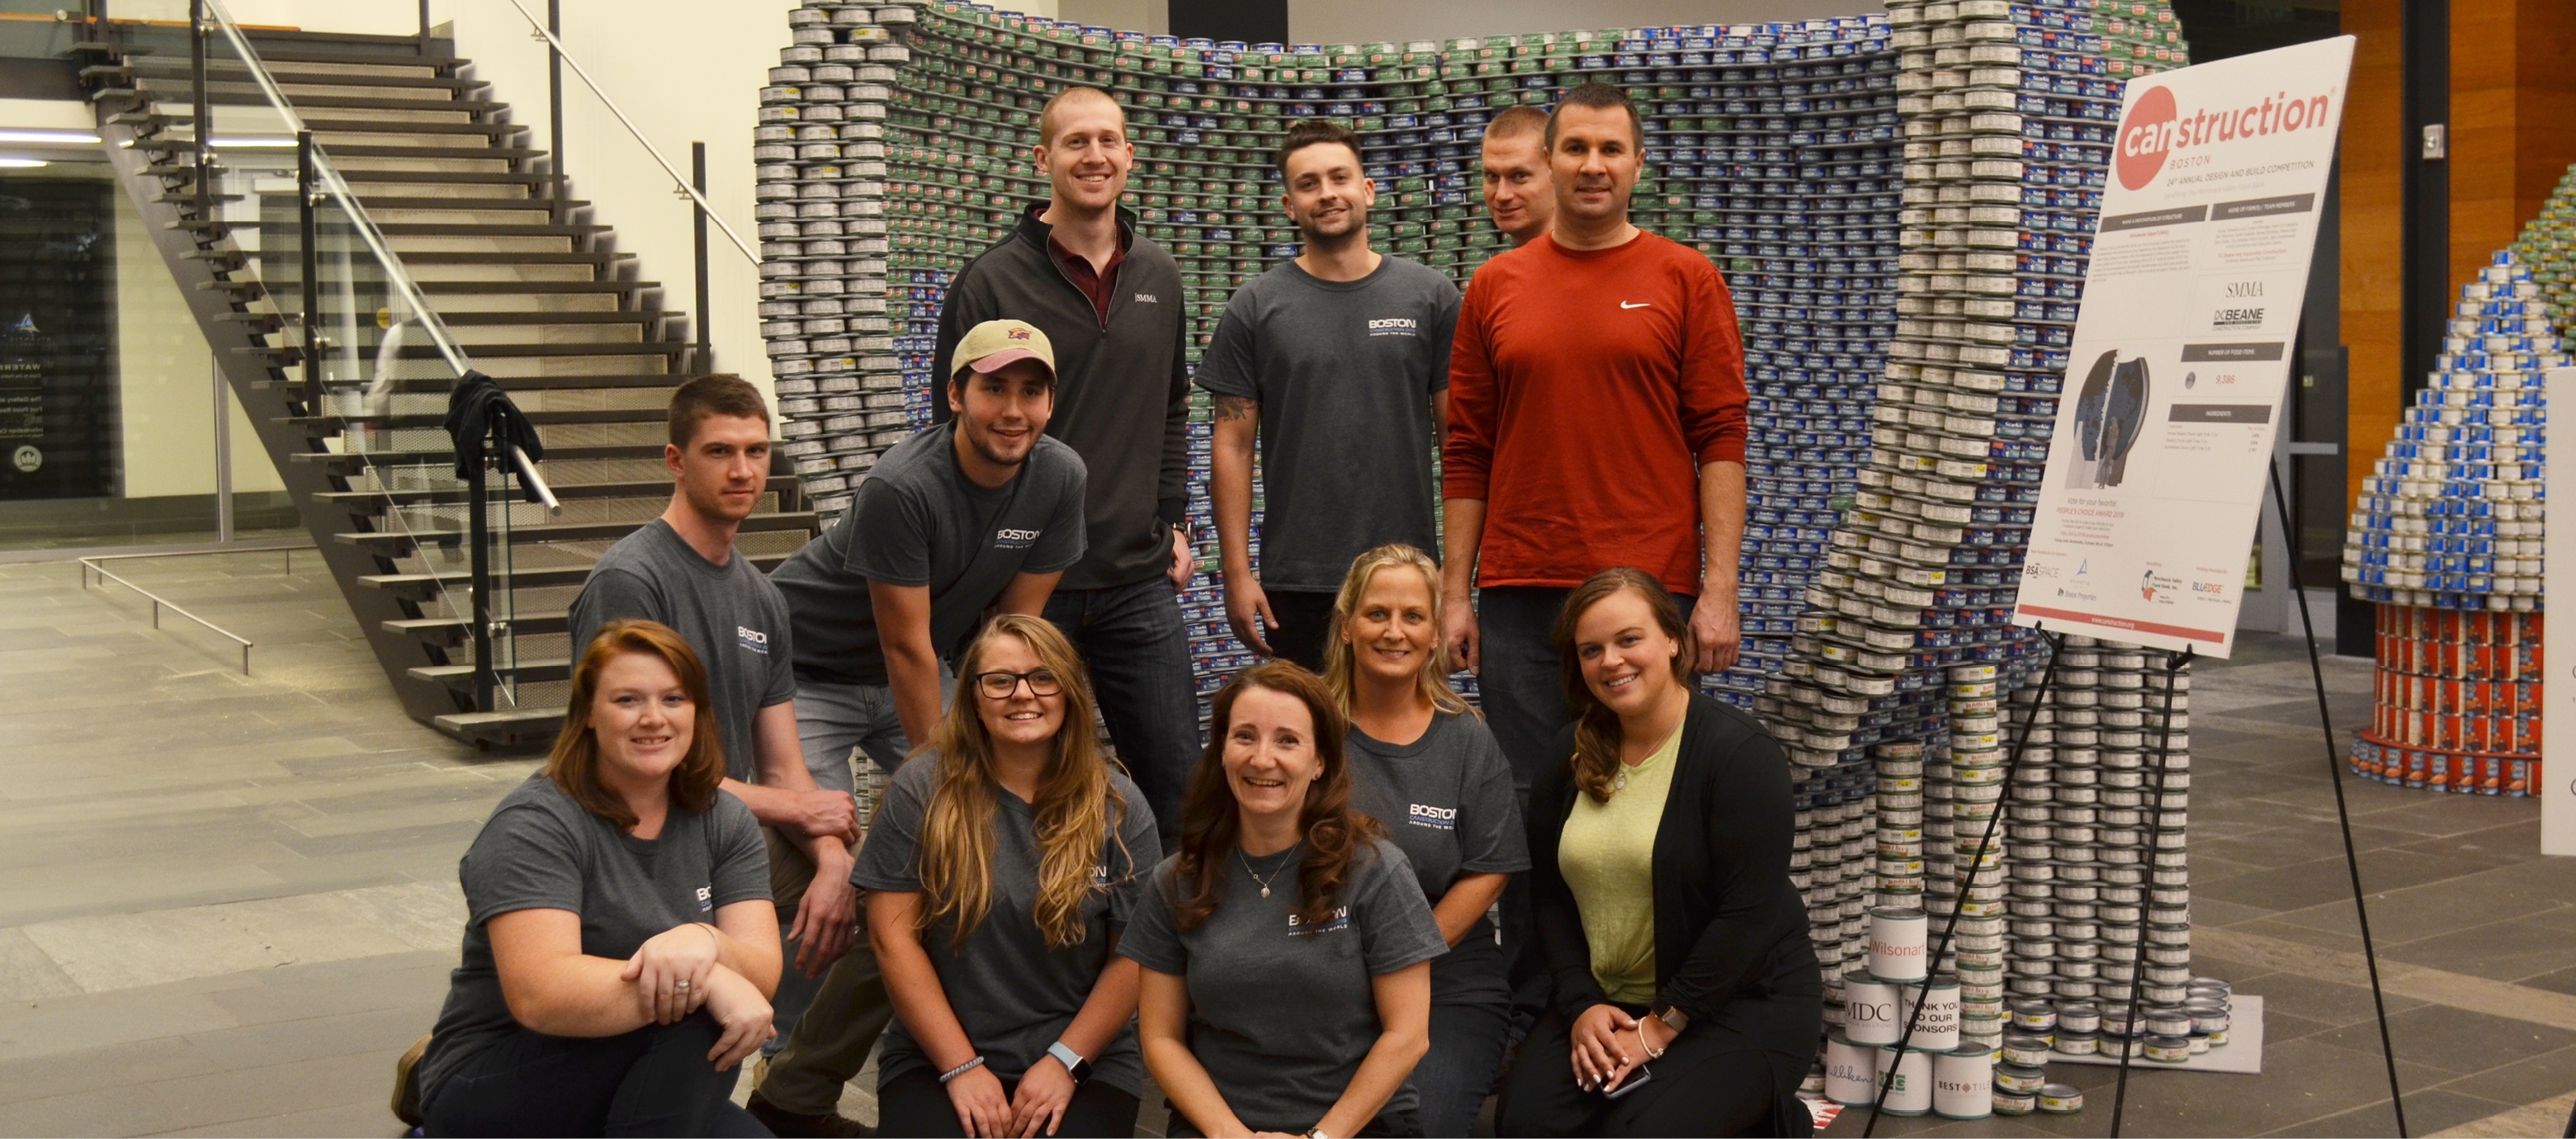 SMMA won Most Cans at the 2019 Boston Canstruction Awards Night.